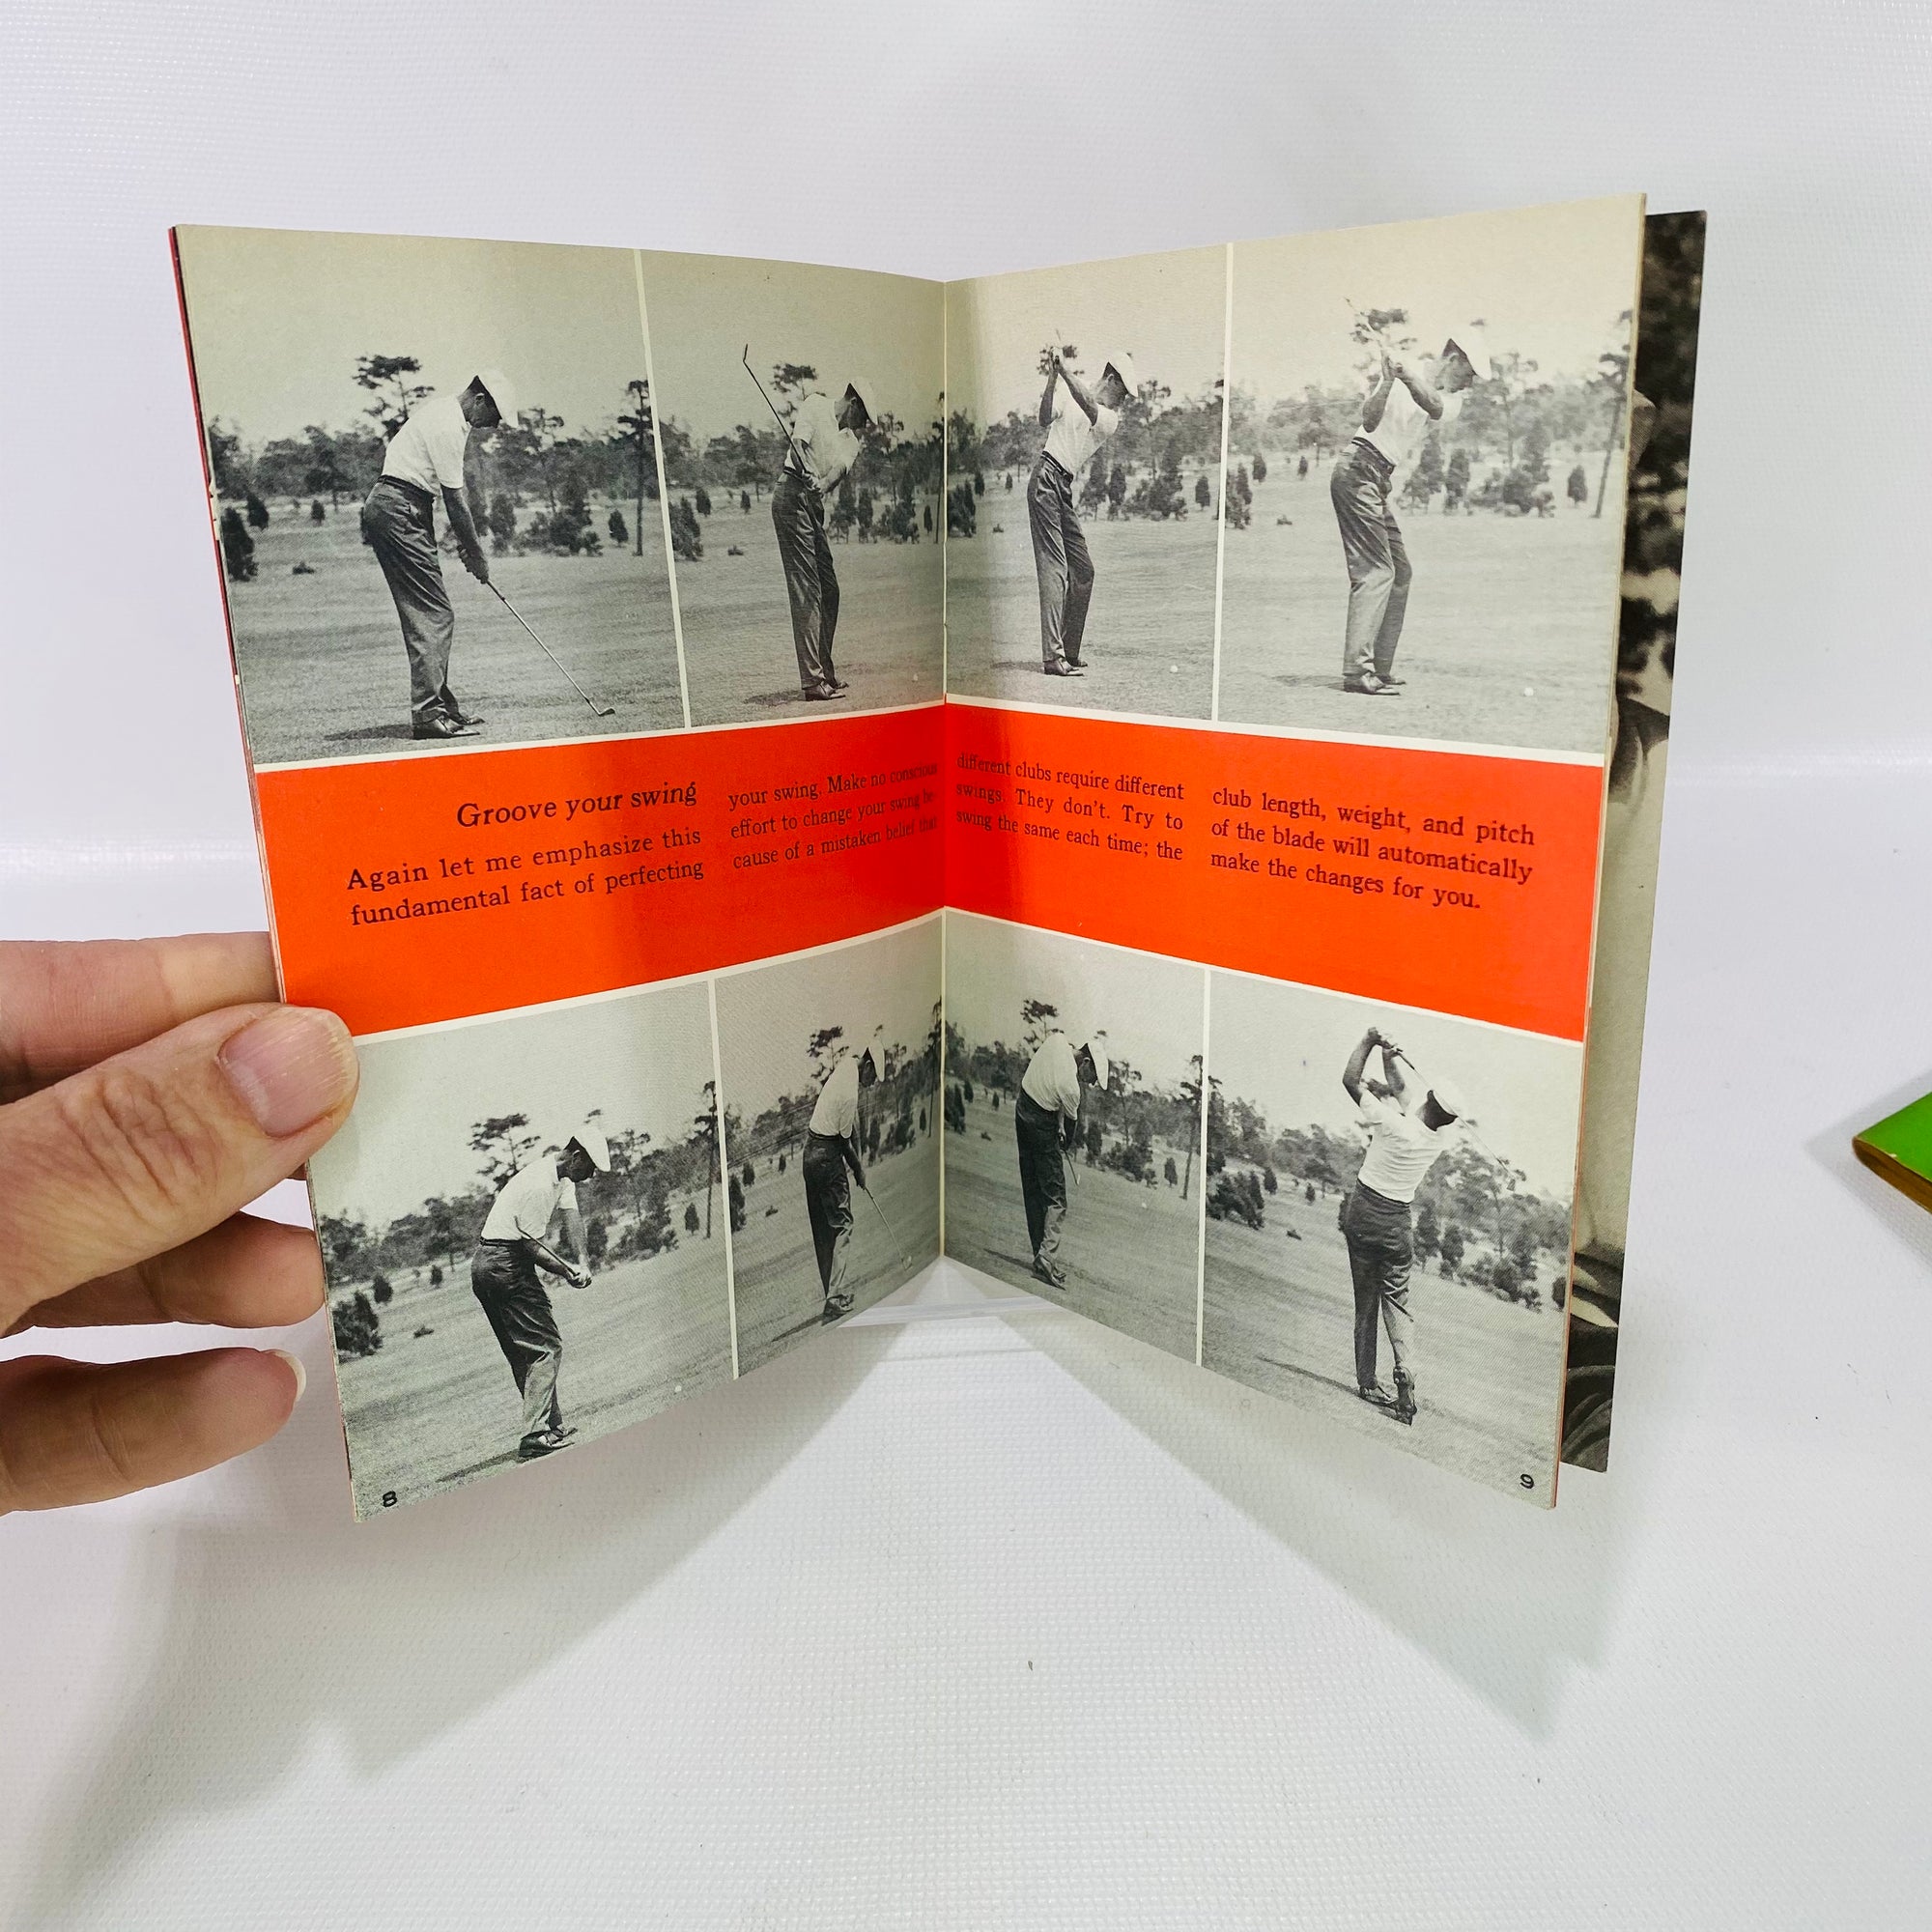 How to Improve your Golf (1960) Pub. by The National Golf Assoc. & Let's Analyze your Golf Swing Pamphlets